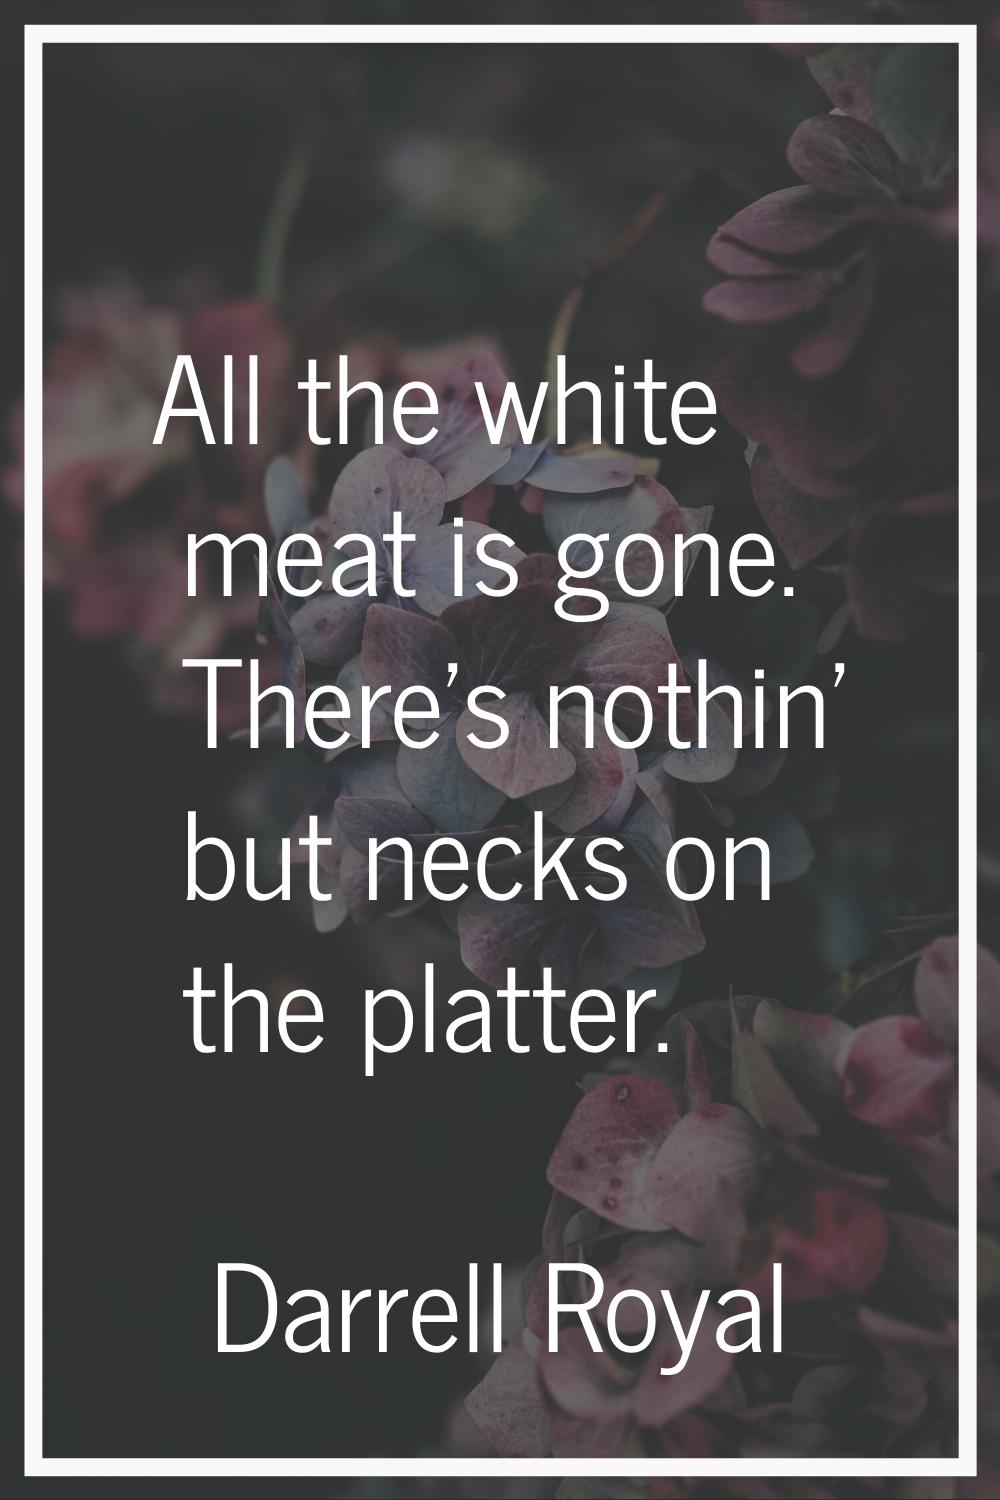 All the white meat is gone. There's nothin' but necks on the platter.